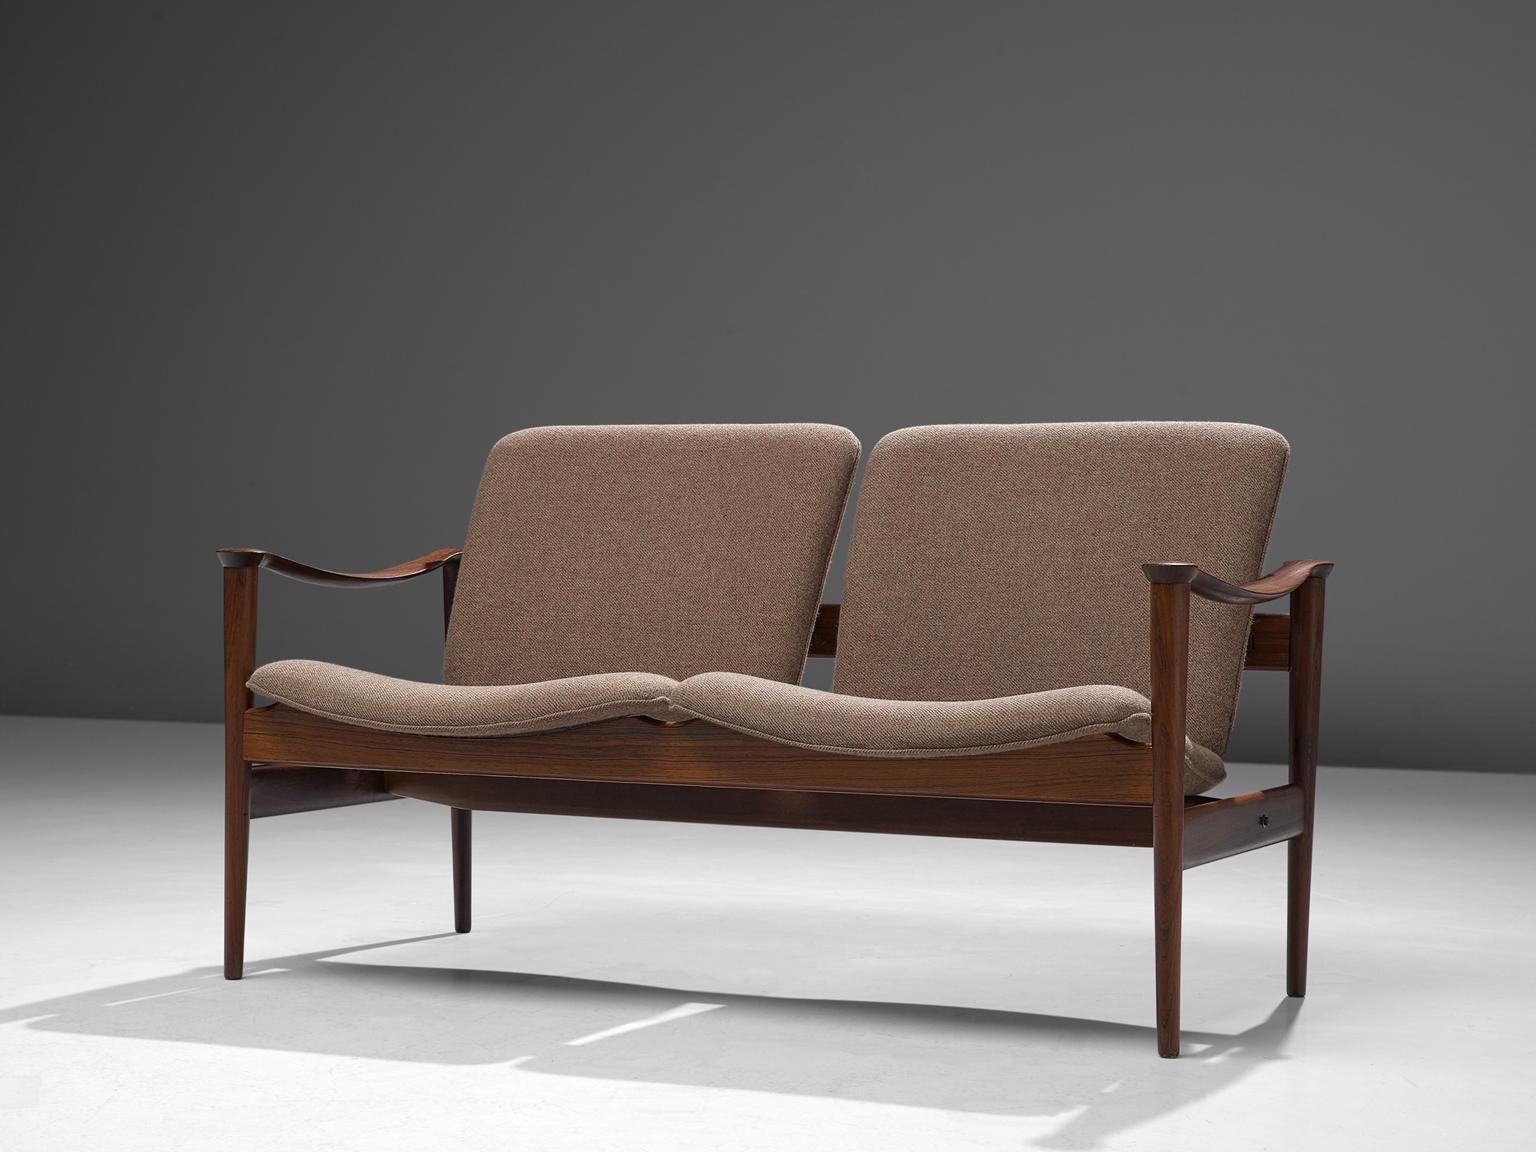 Fredrik A. Kayser for Vatne Lenestolfabrikk, sofa model 711, rosewood and taupe fabric, Norway, 1960

This sofa is designed by Frederik A. Kayser and executed by Vatne Lenestolfabrikk. The sofa is executed in rosewood, leather and is detailed with